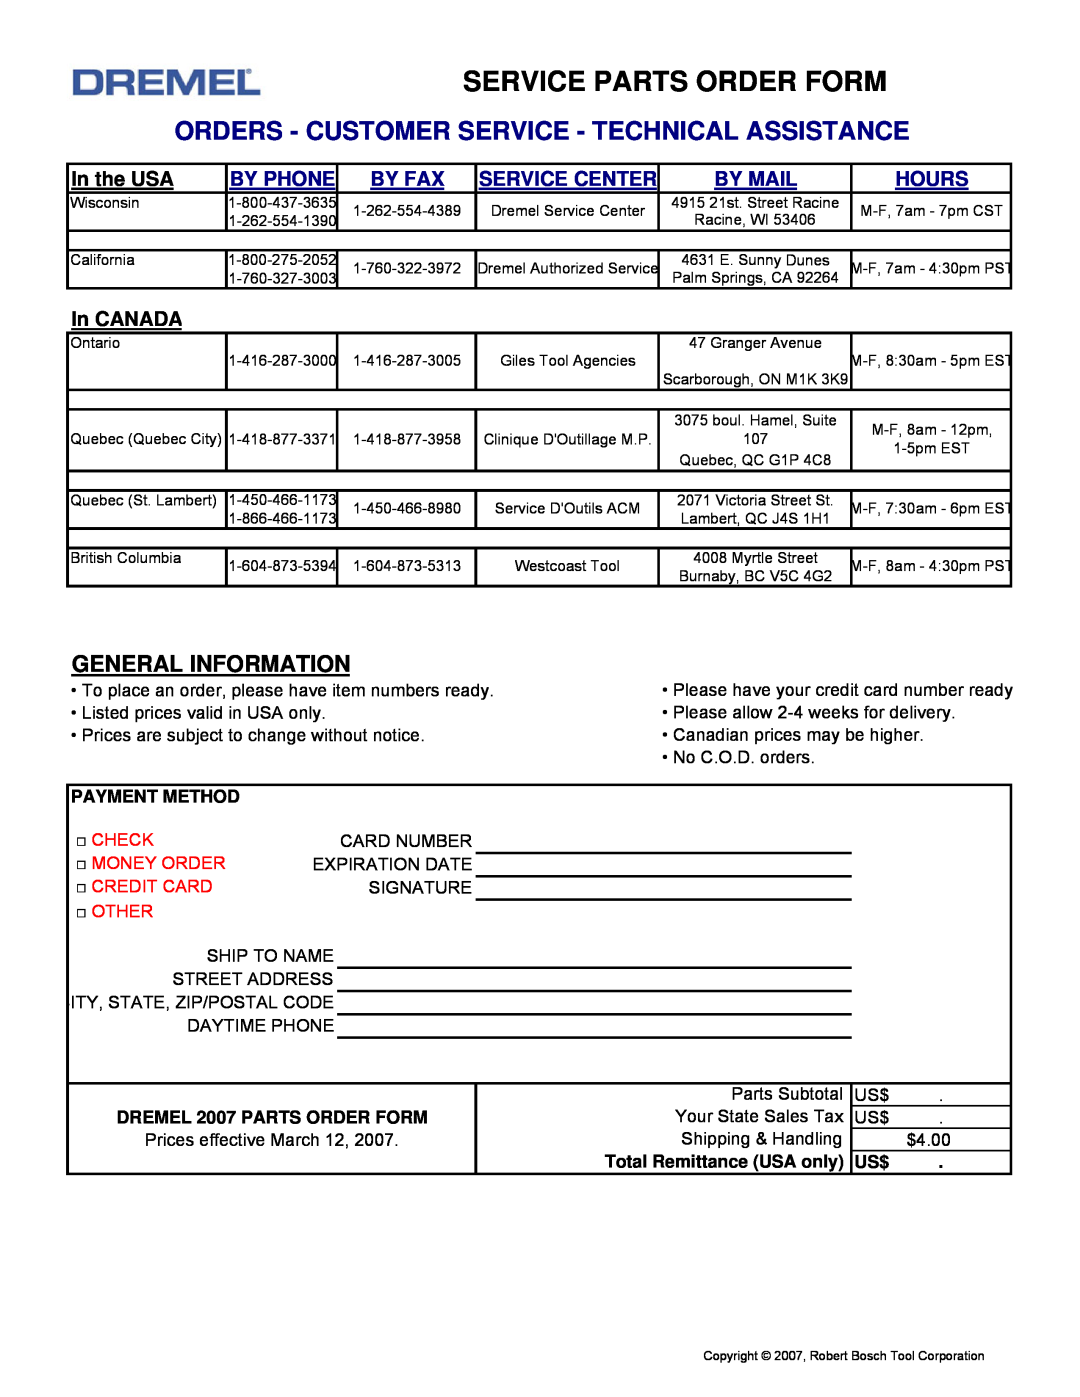 Dremel 750-2 Service Parts Order Form, Orders - Customer Service - Technical Assistance, General Information, In the USA 